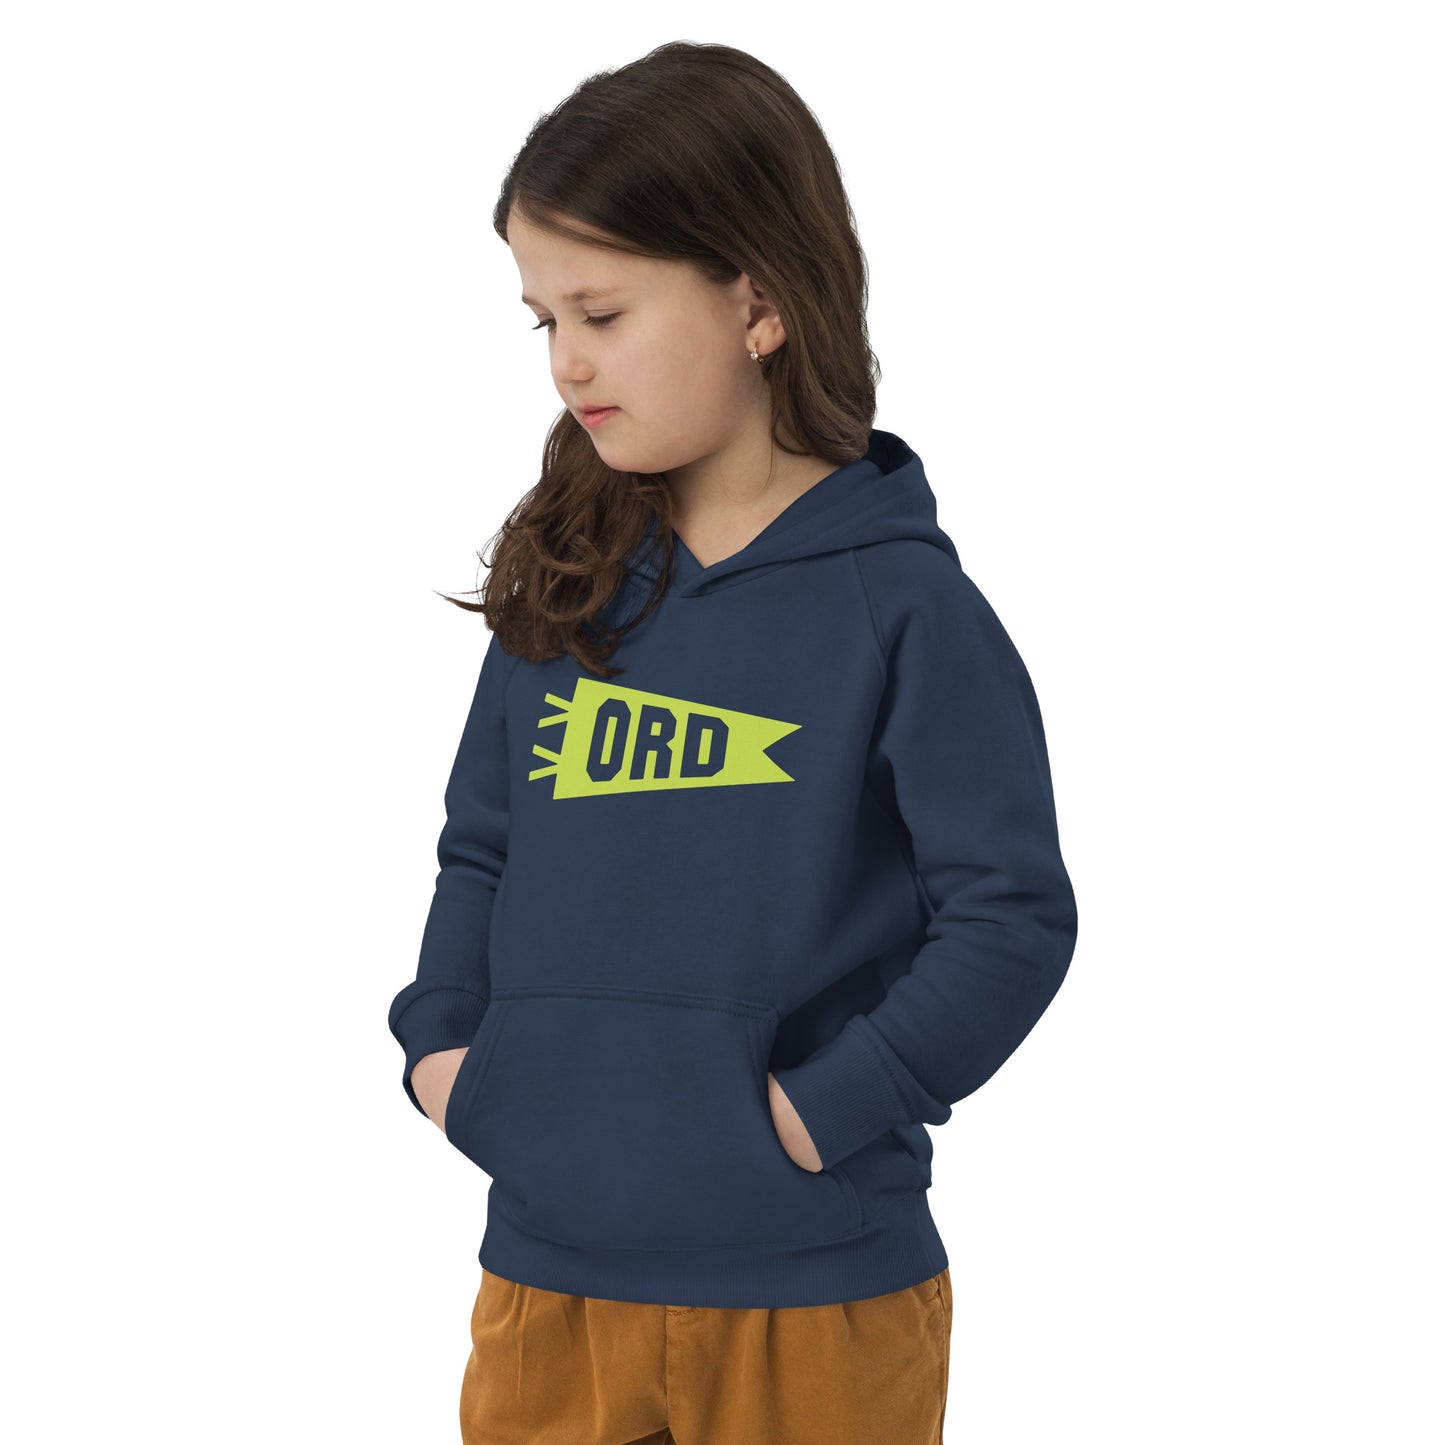 Kid's Sustainable Hoodie - Green Graphic • ORD Chicago • YHM Designs - Image 05